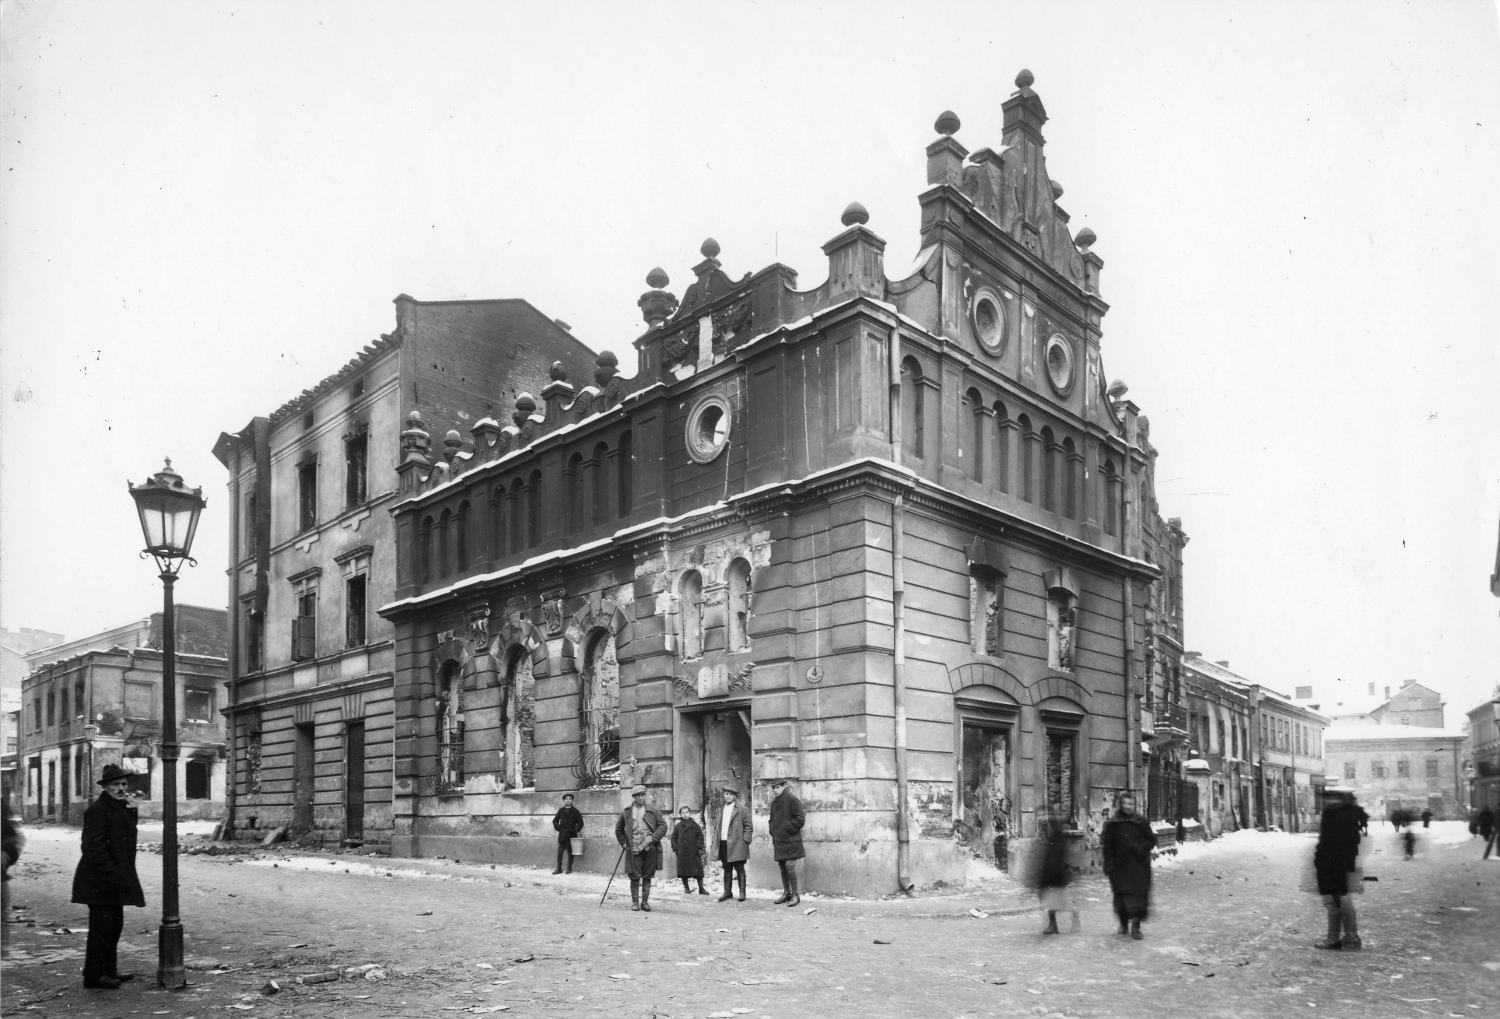 The Chasidic synagogue looted and burned down during the pogrom. This is one of the most famous images of 1918 pogrom in Lviv